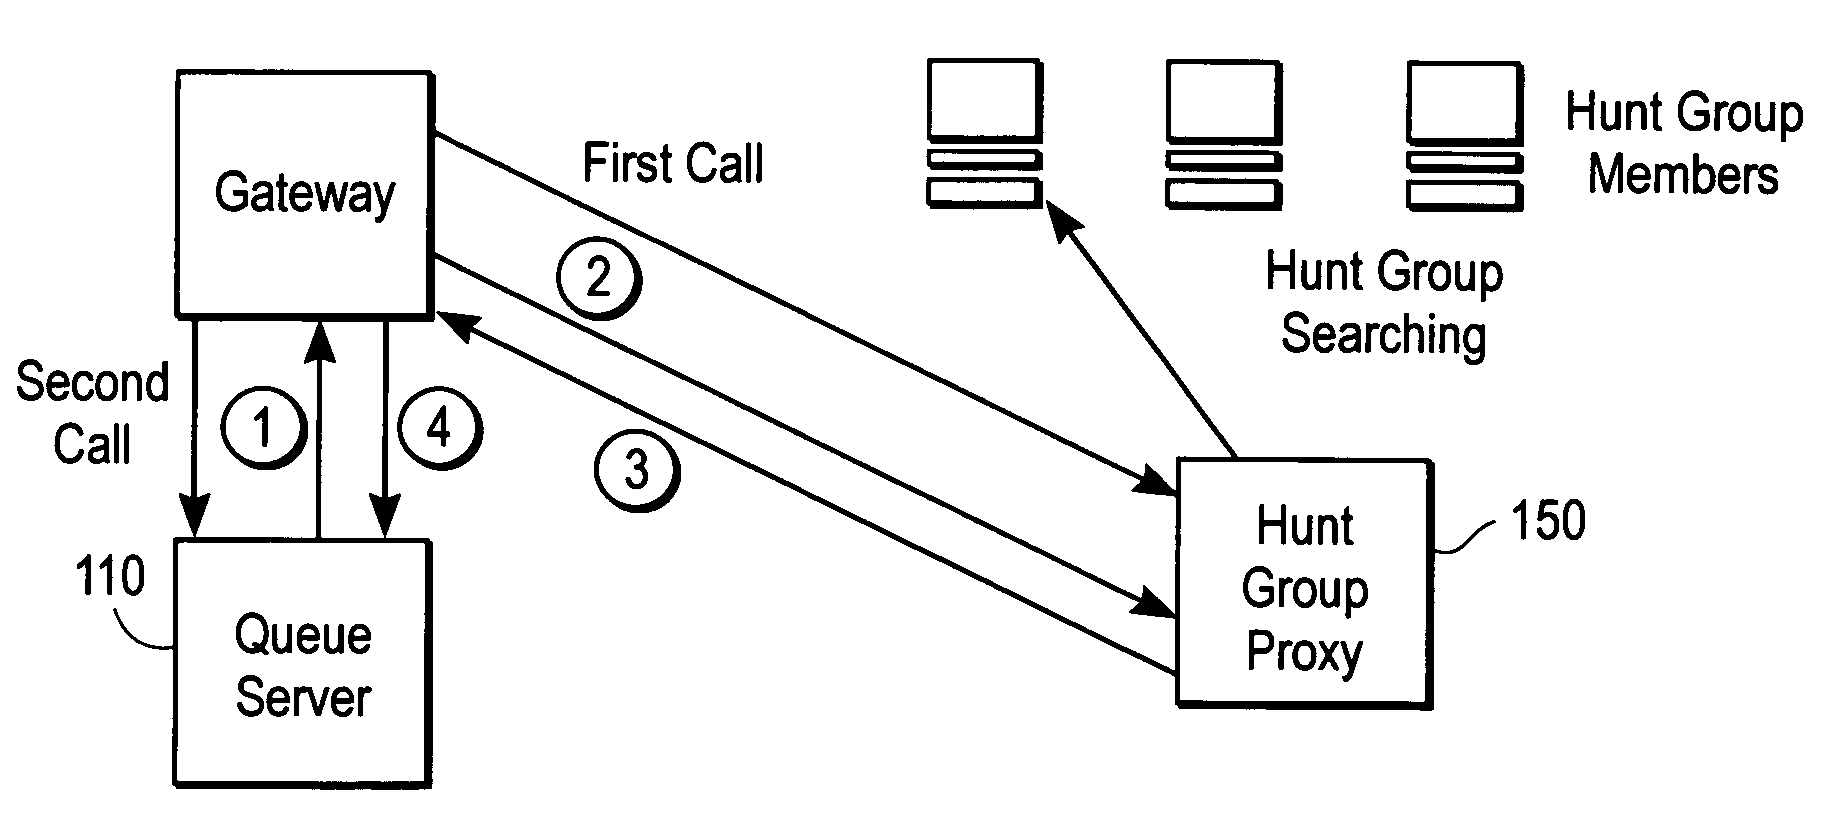 Queue as callable entity in an IP telephony system